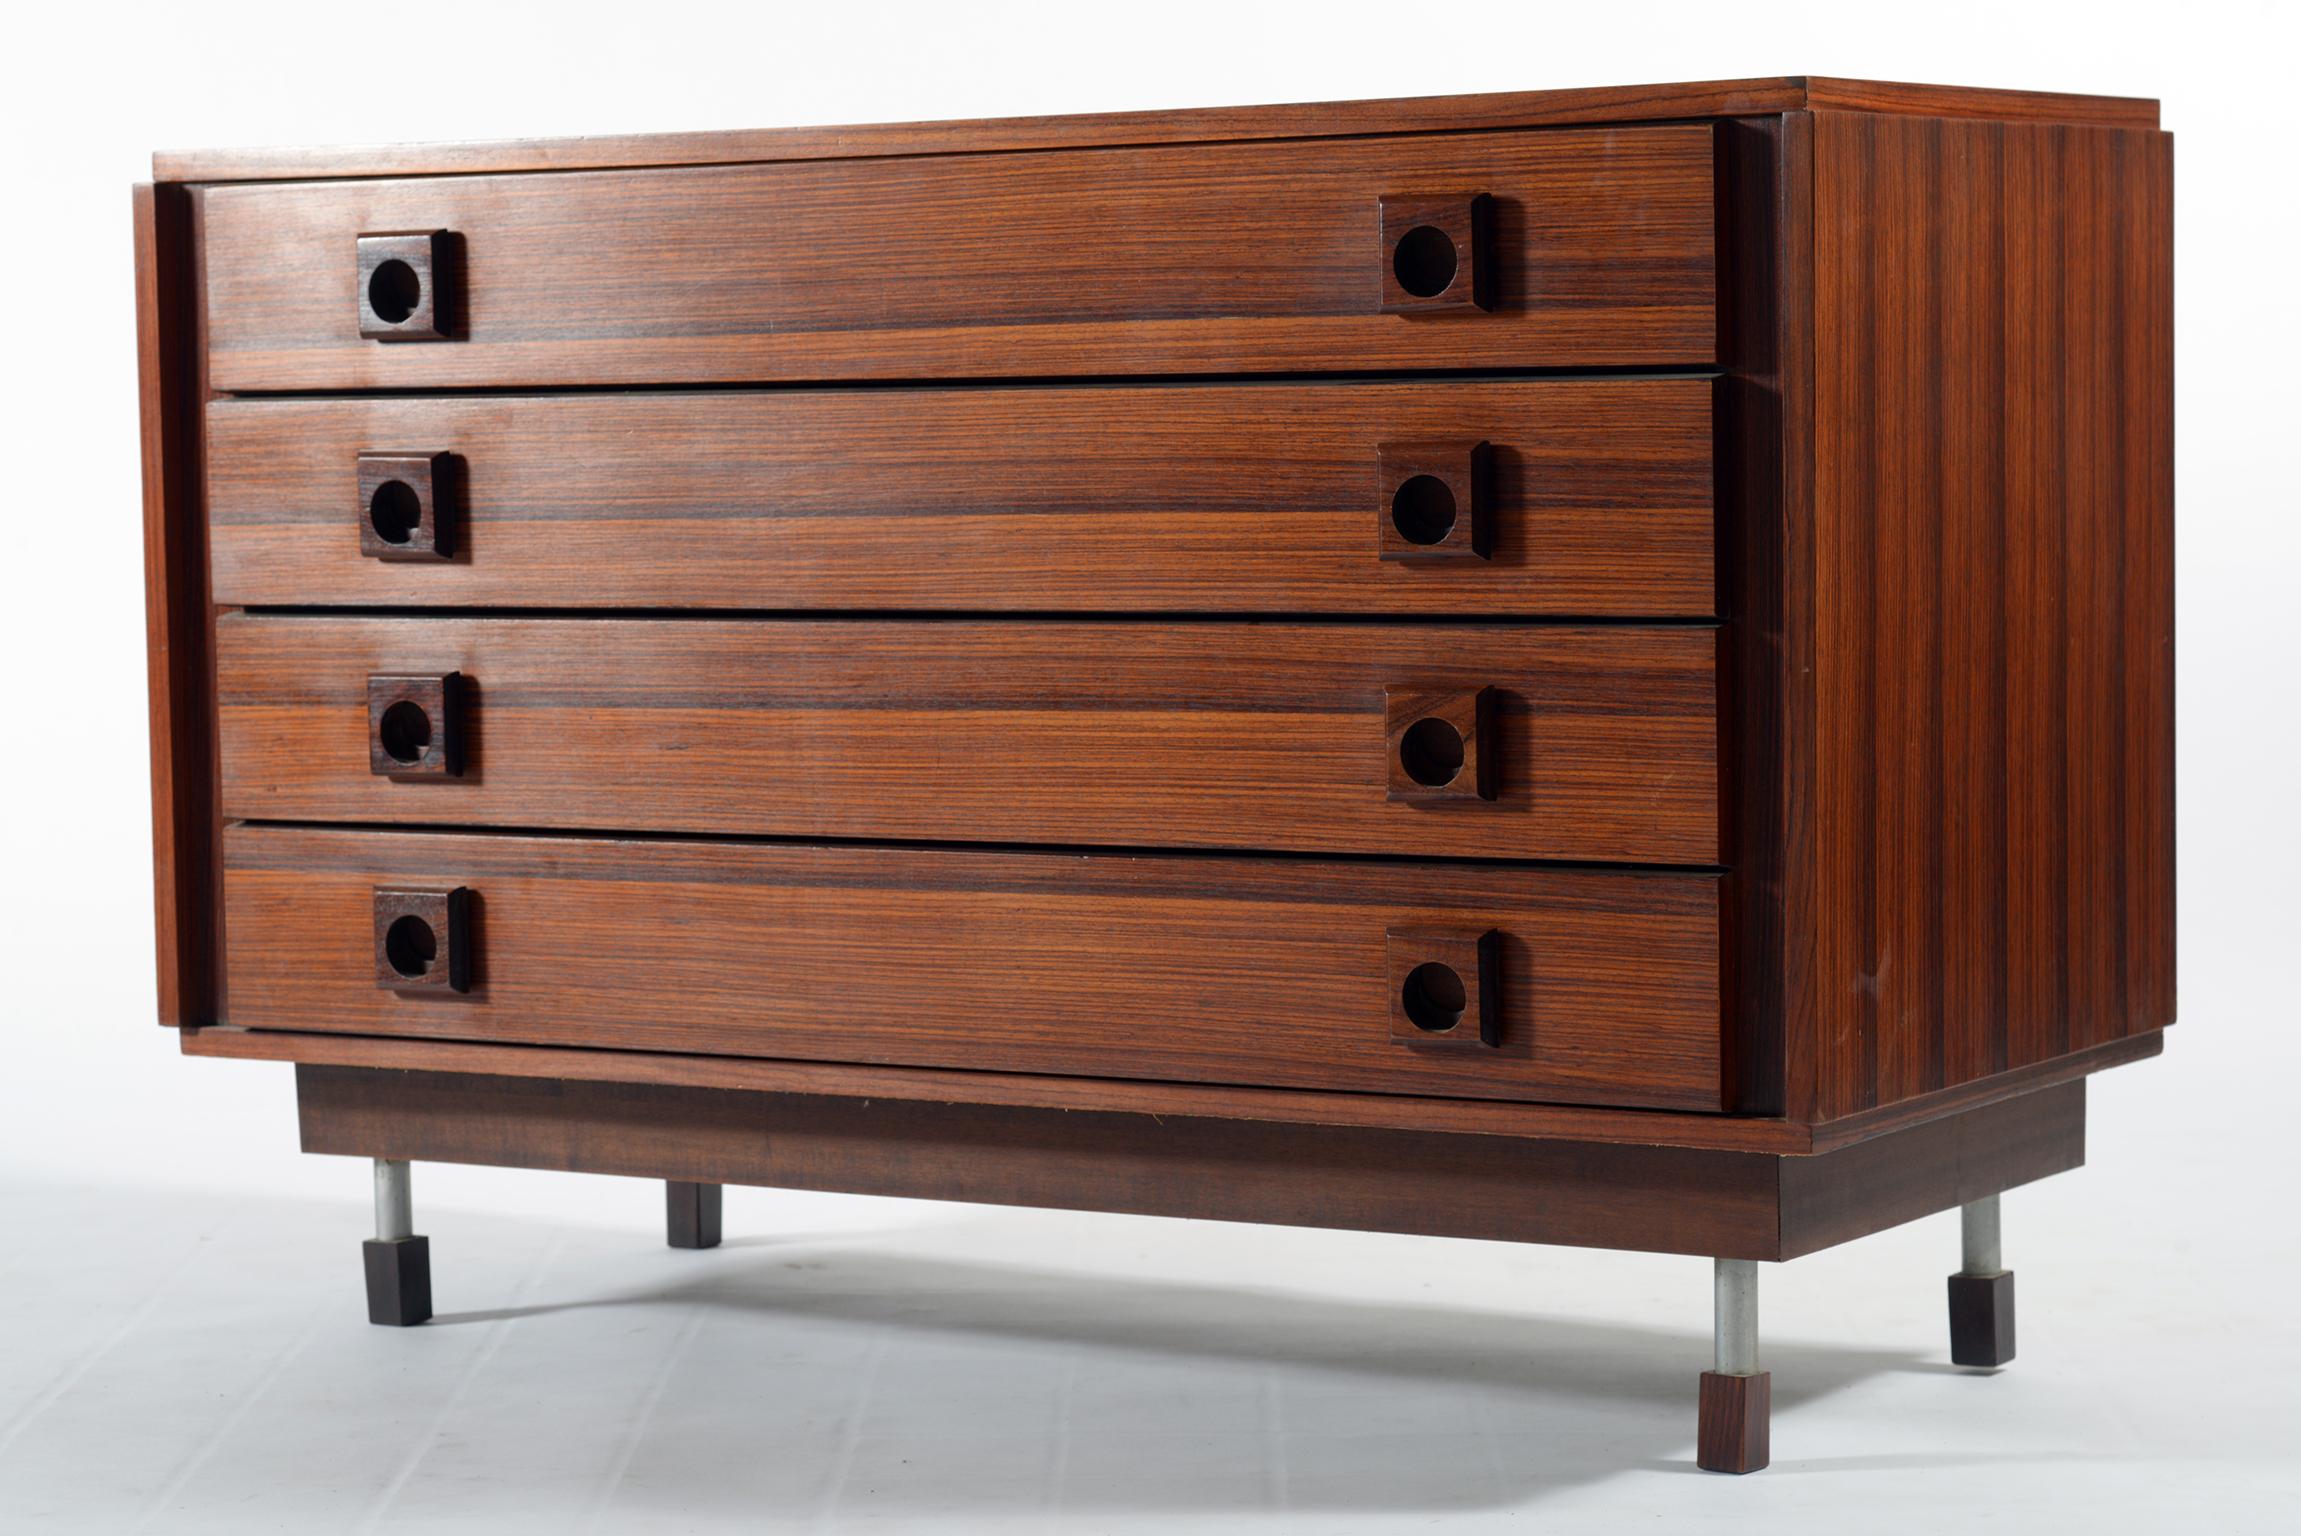 Italian midcentury precious exotic wood chest of drawers with solid sculptured wood handless, metal and wood legs,
1960s.